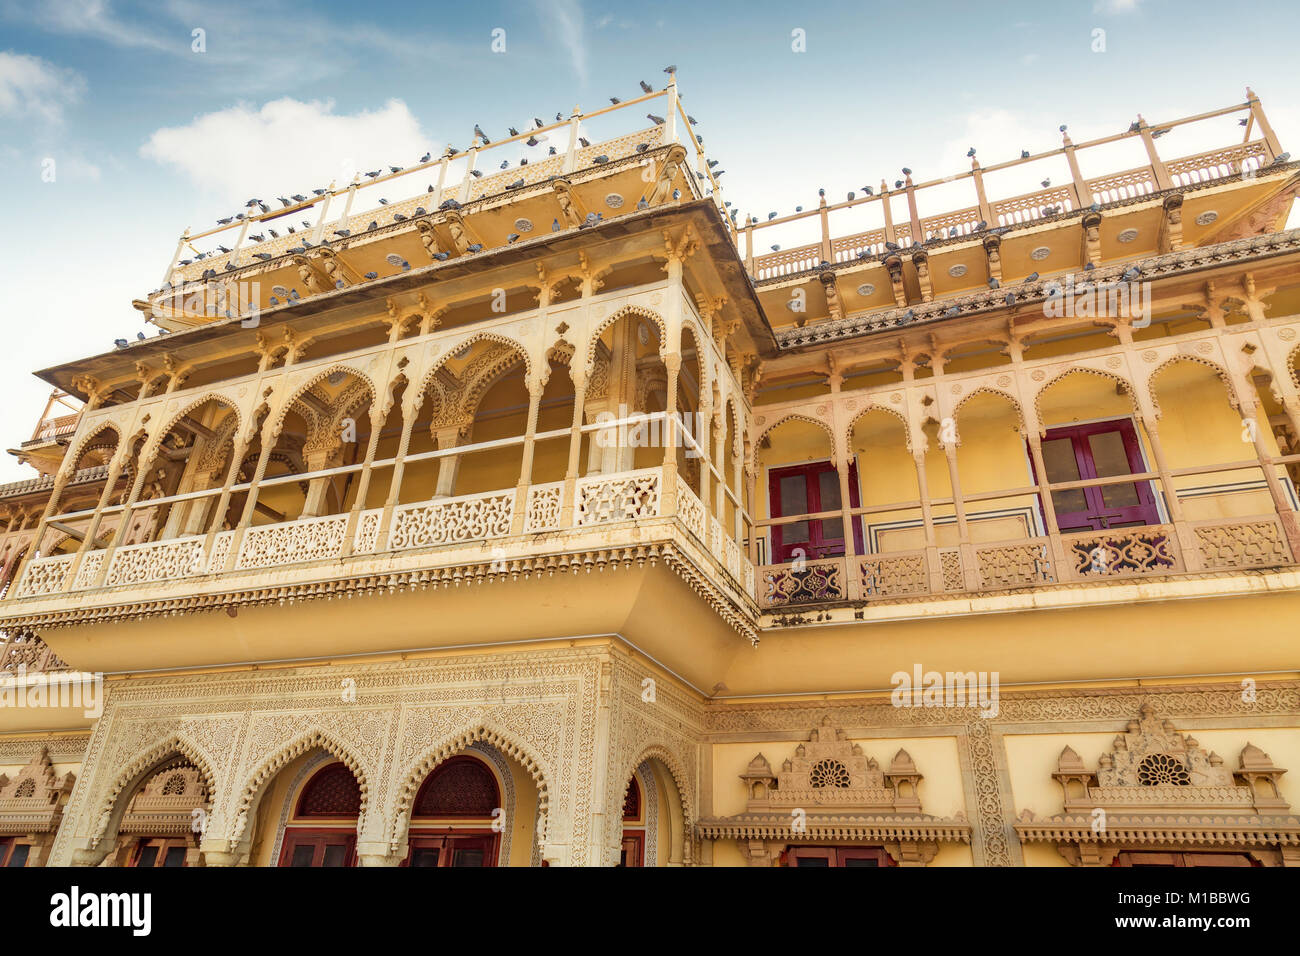 City Palace Jaipur Rajasthan - storico Royal Palace Museum noto come Mubarak Mahal nel complesso del City Palace Foto Stock